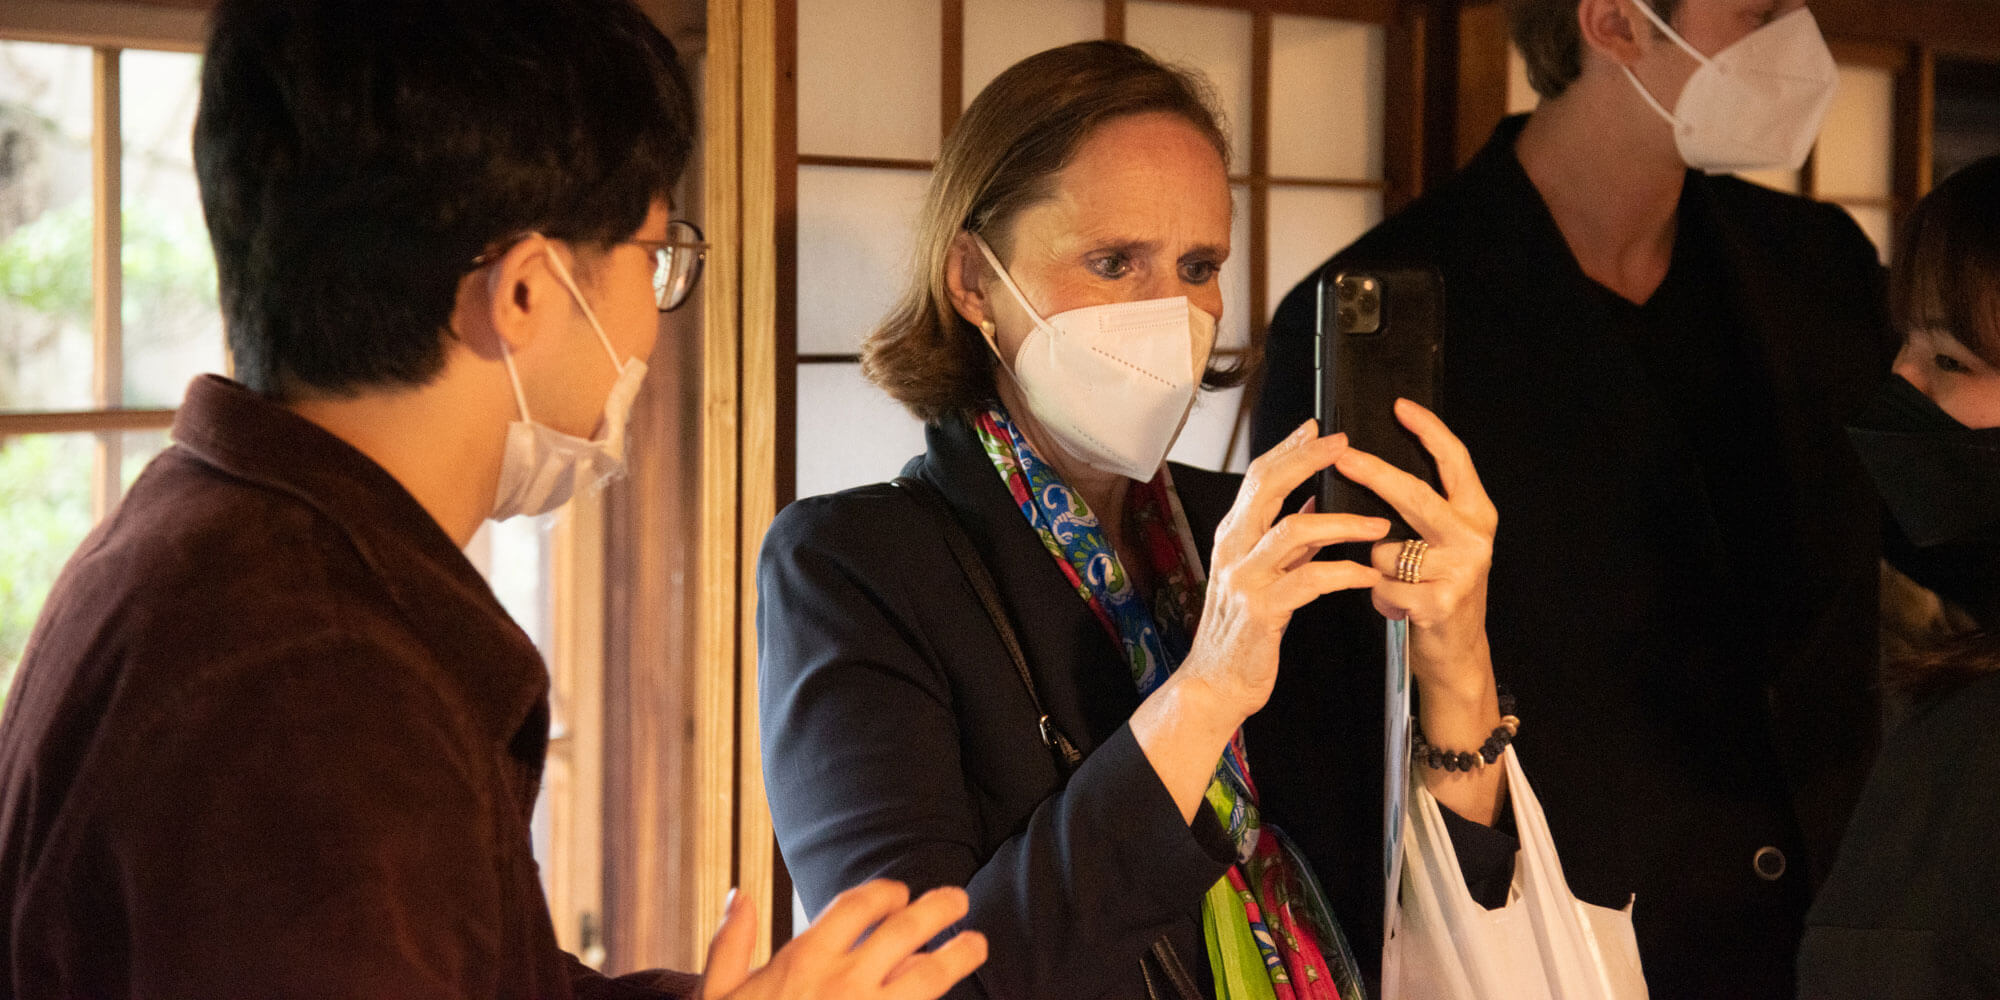 Dr. Elisabeth Bertagnoli, Austrian Ambassador to Japan, visited the festival and interacted with the artists and the local creatives working on citizen-led projects.